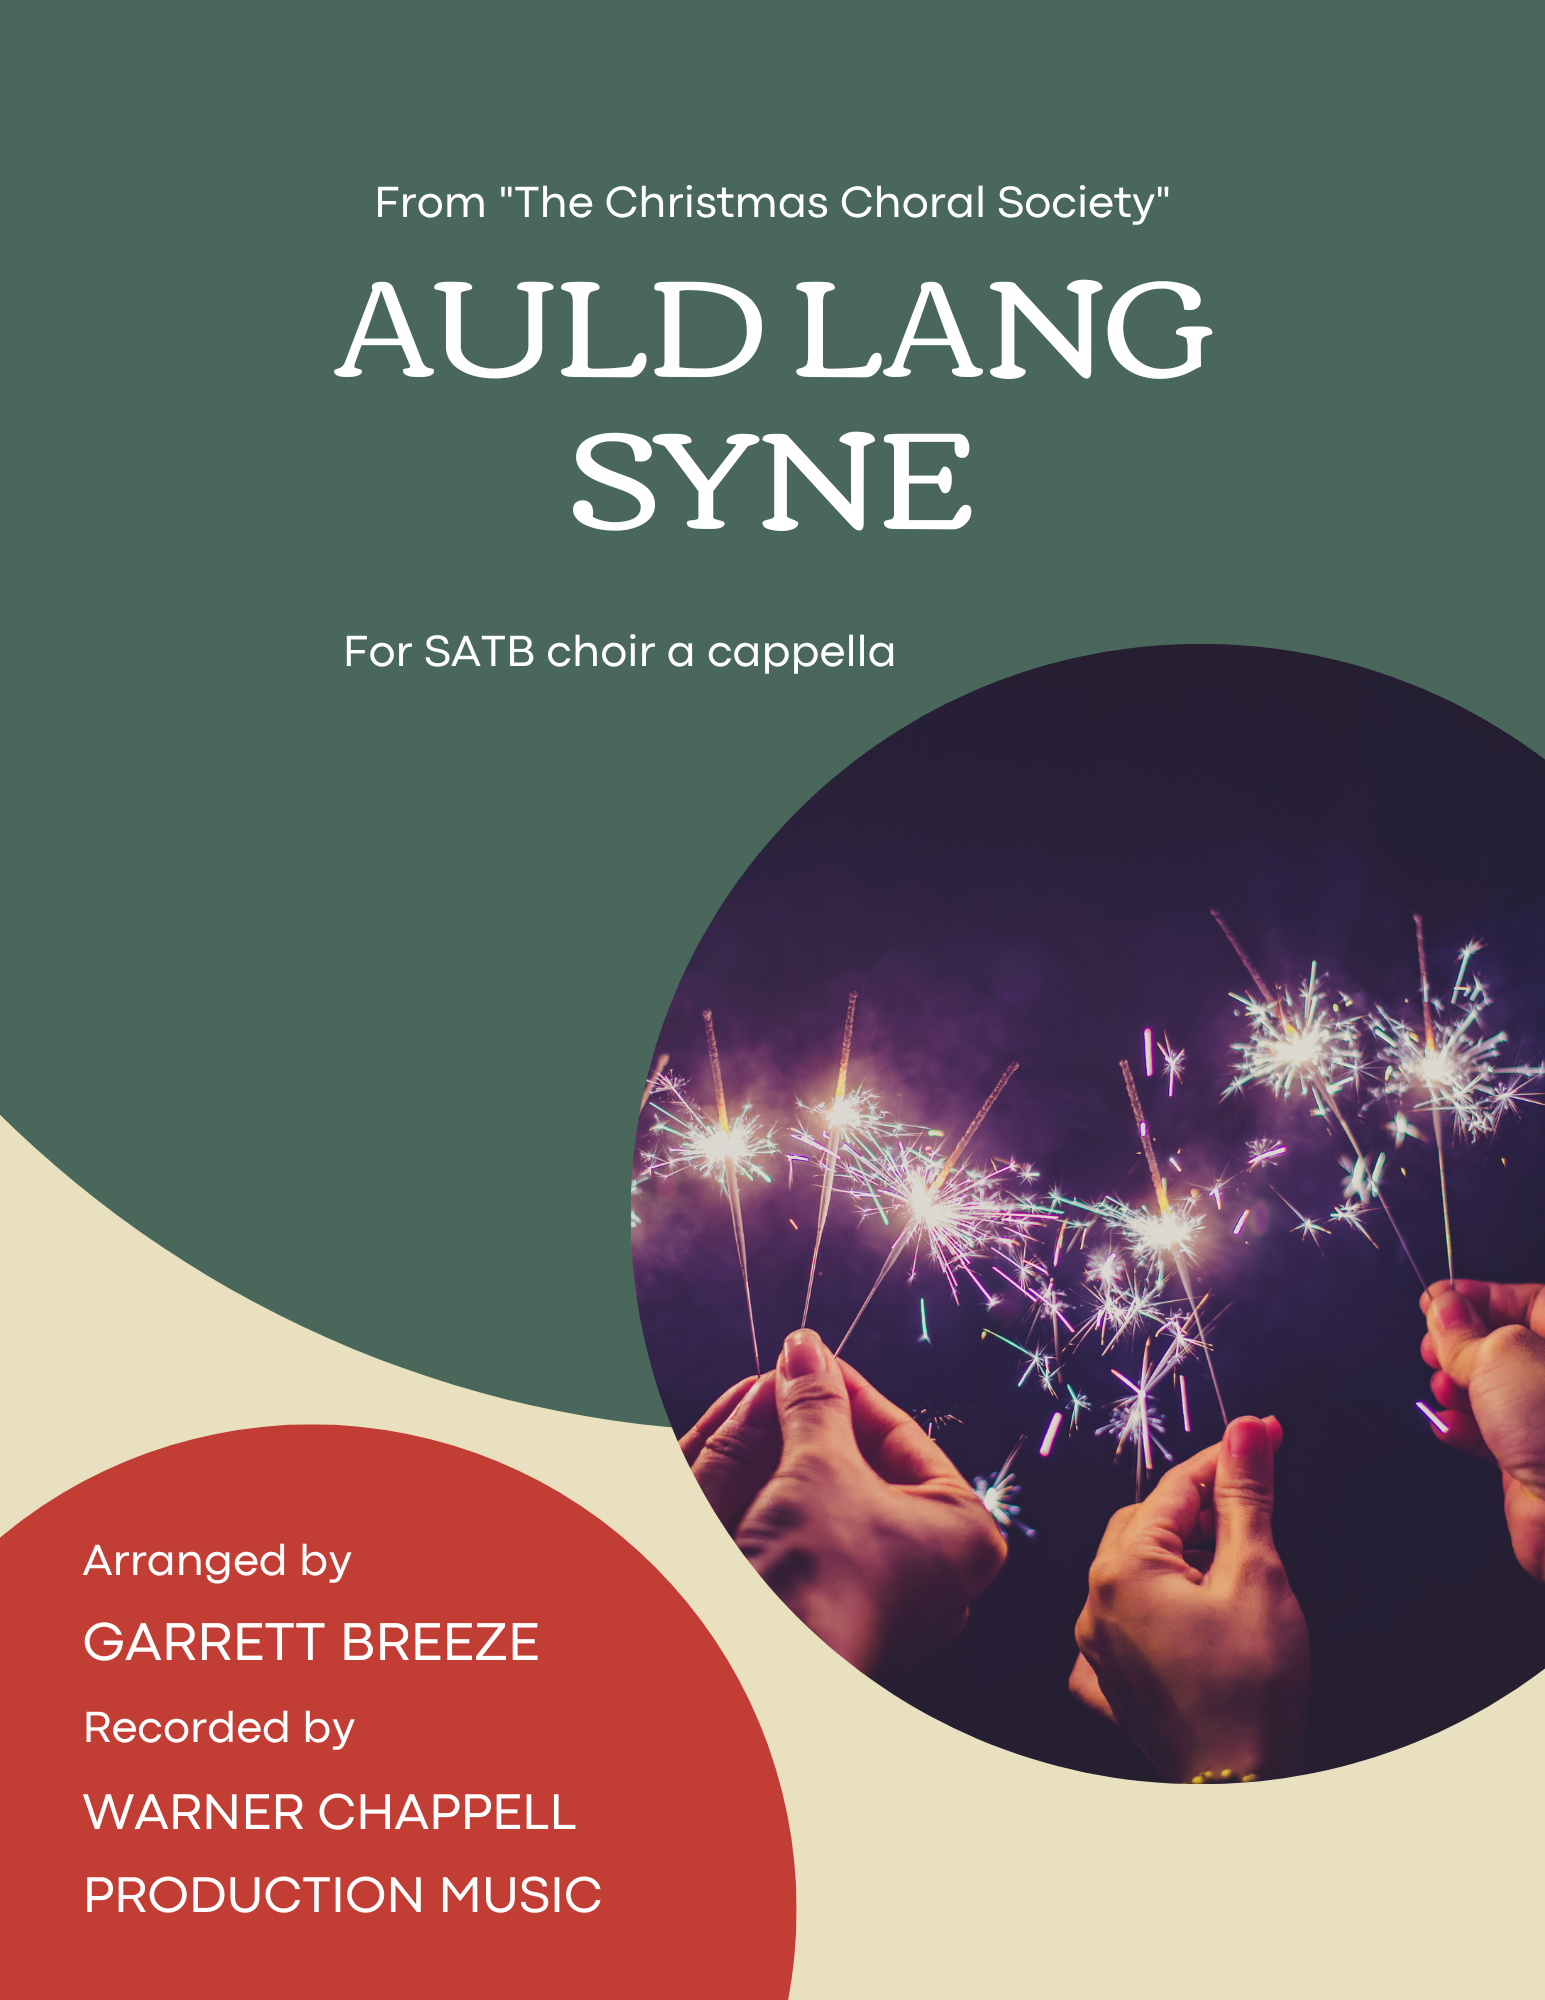 Auld Lang Syne / I Love You Truly / Tell Me Why (3 Song Set) (TTBB) (arr.  SPEBSQSA) - Barbershop Harmony Society